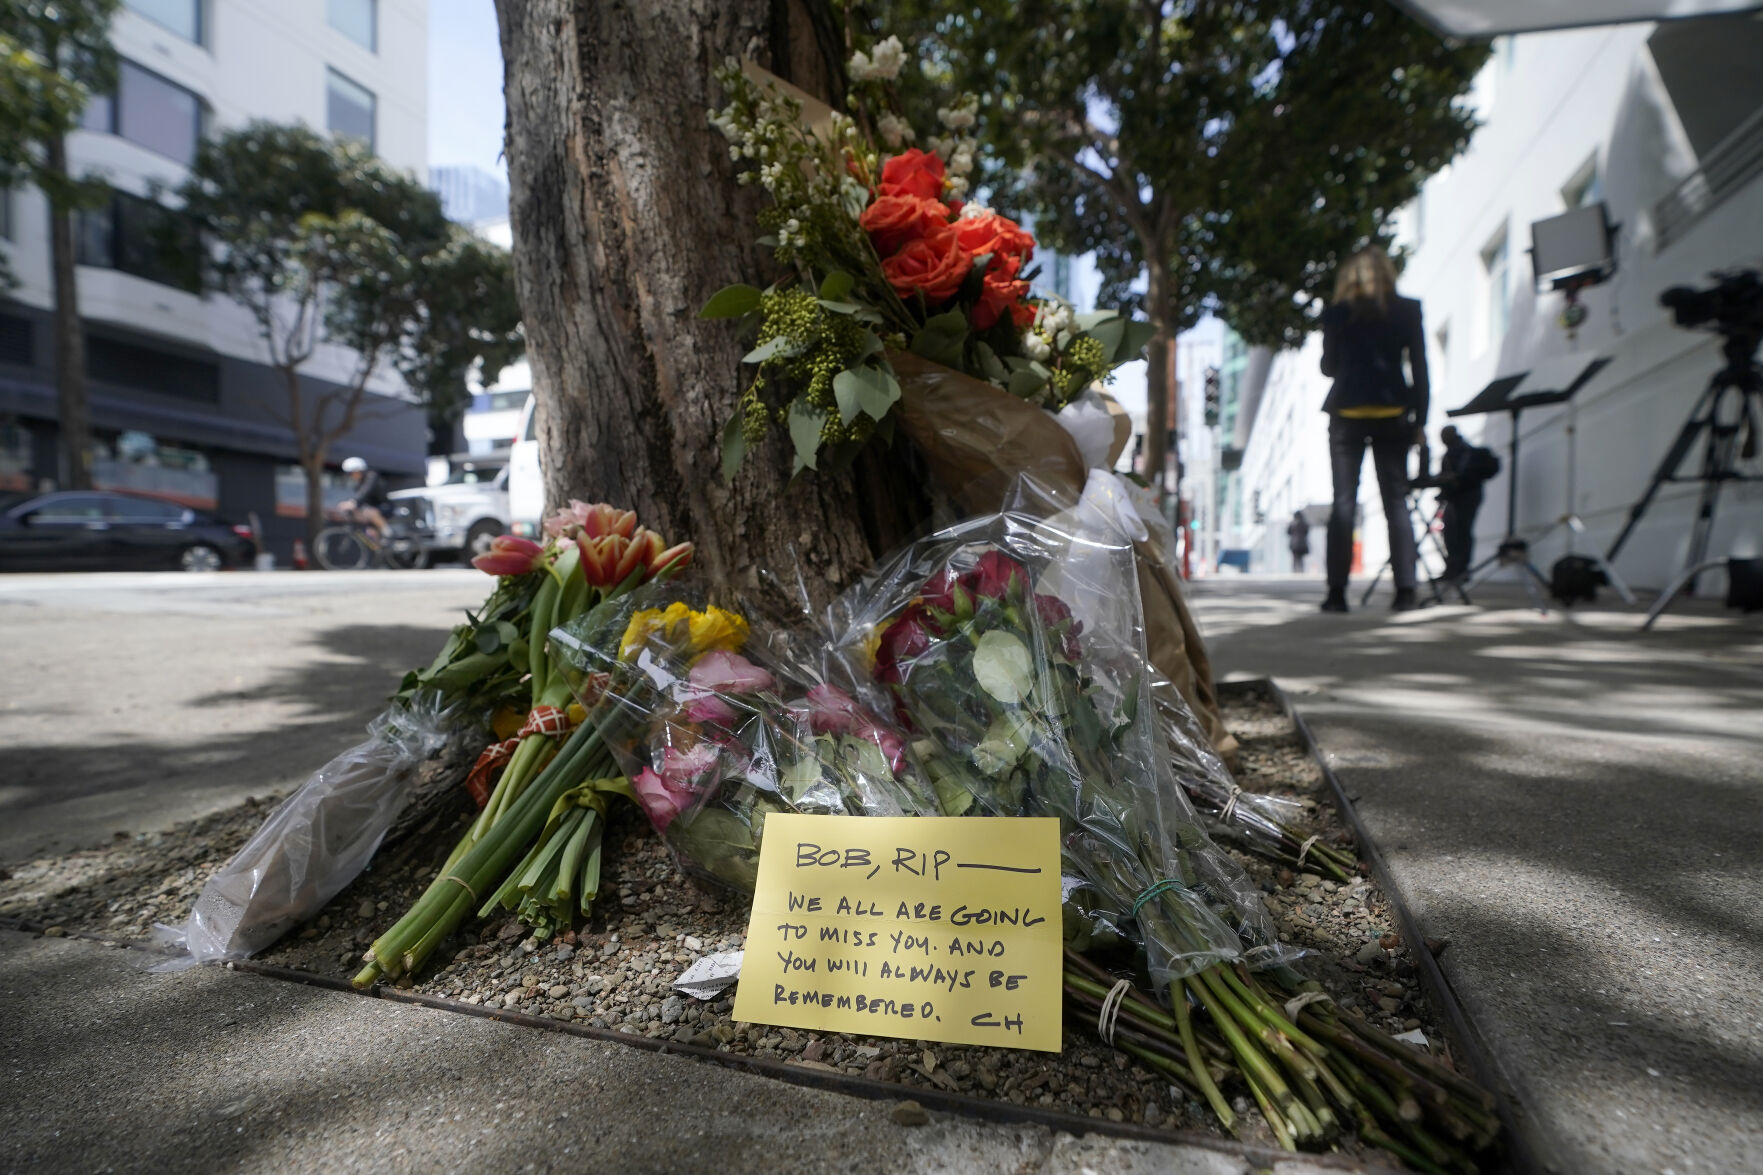 <p>Flowers sit at a tree in front of the building where a technology executive was fatally stabbed outside of in San Francisco, Thursday, April 6, 2023. Details of how tech executive Bob Lee came to be fatally stabbed in downtown San Francisco early Tuesday were scarce as friends and family continued to mourn the man they called brilliant, kind and unlike others in the industry. (AP Photo/Jeff Chiu)</p>   PHOTO CREDIT: Jeff Chiu - staff, AP